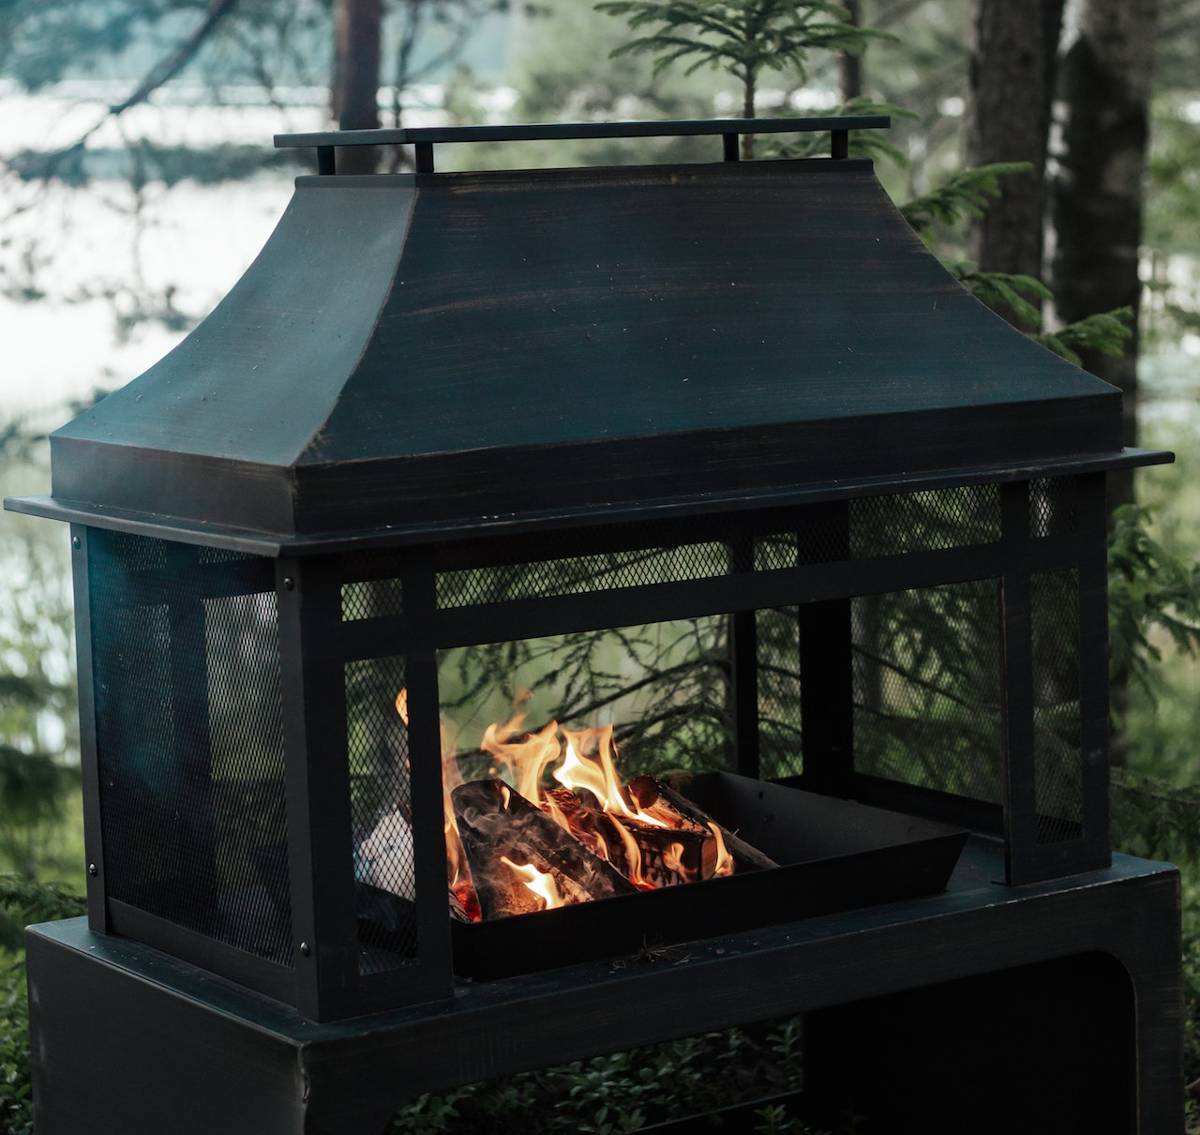 What Is the Safest Type of Fire Pit?